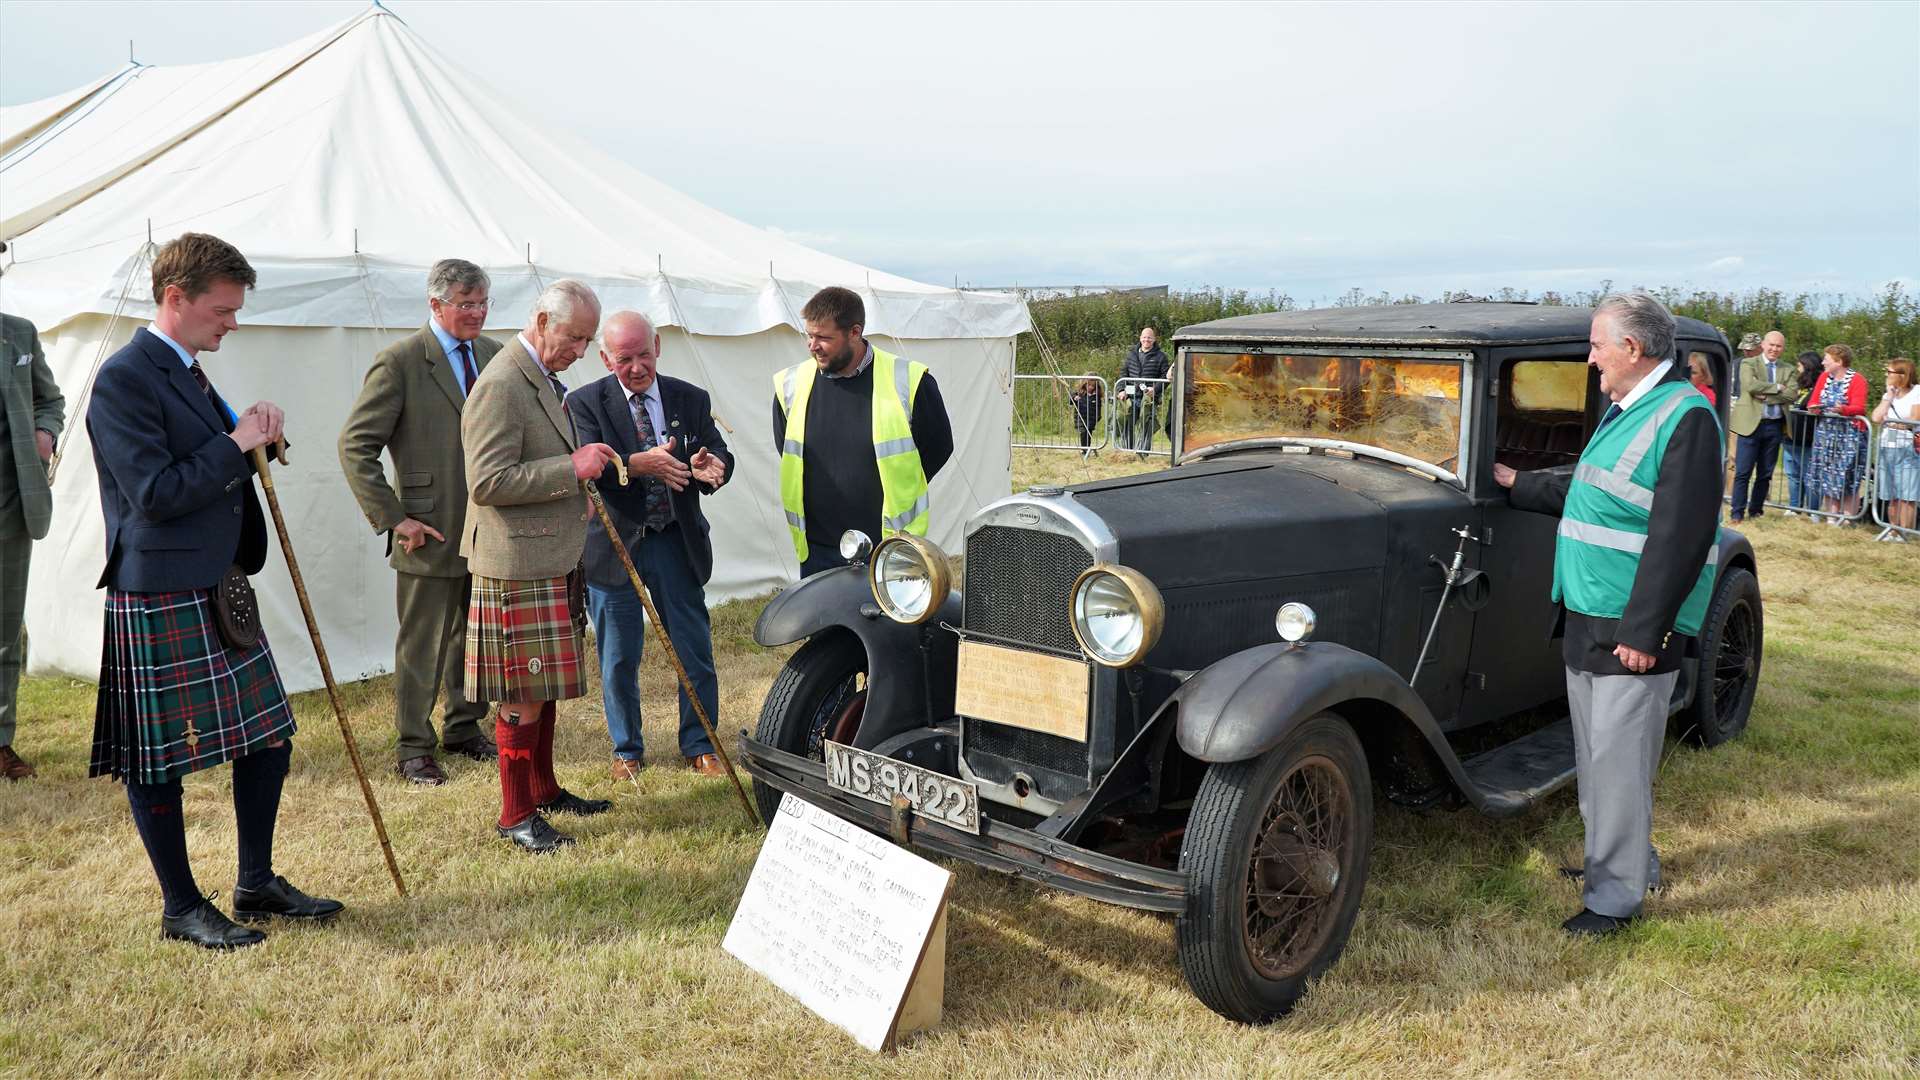 The King meets members of the Caithness and Sutherland Vintage and Classic Vehicle Club who showed him a 1930 Humber. The car had belonged to a previous owner of His Majesty's residence at the Castle of Mey. Picture: DGS